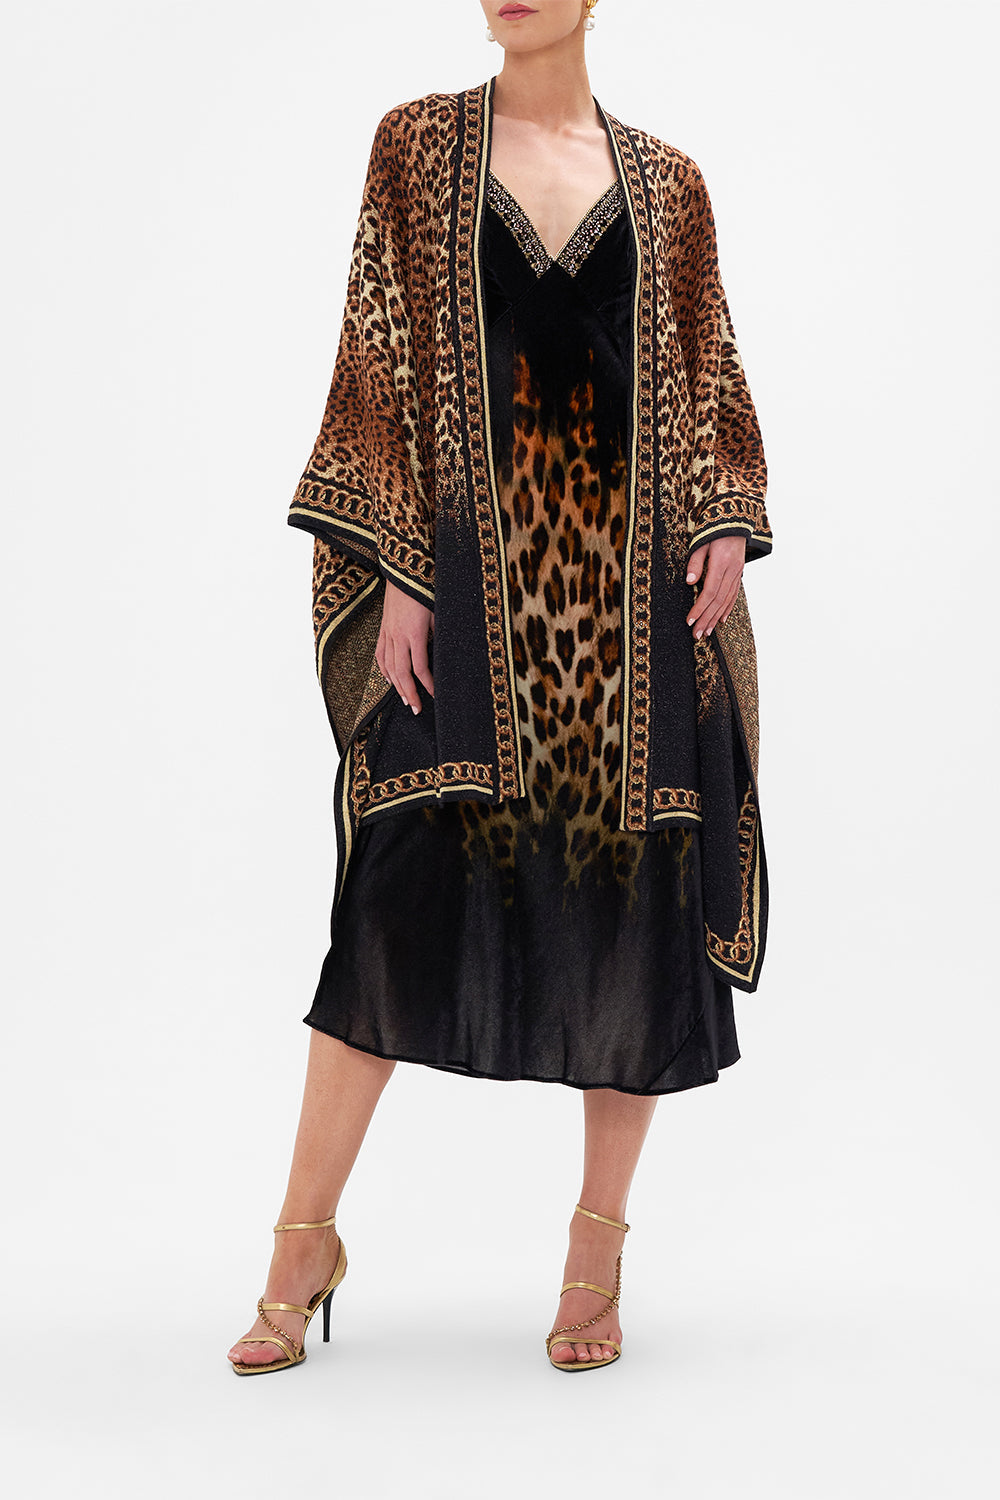 Front view of model wearing CAMILLA leopard print cape knit in Jungle Dreaming print